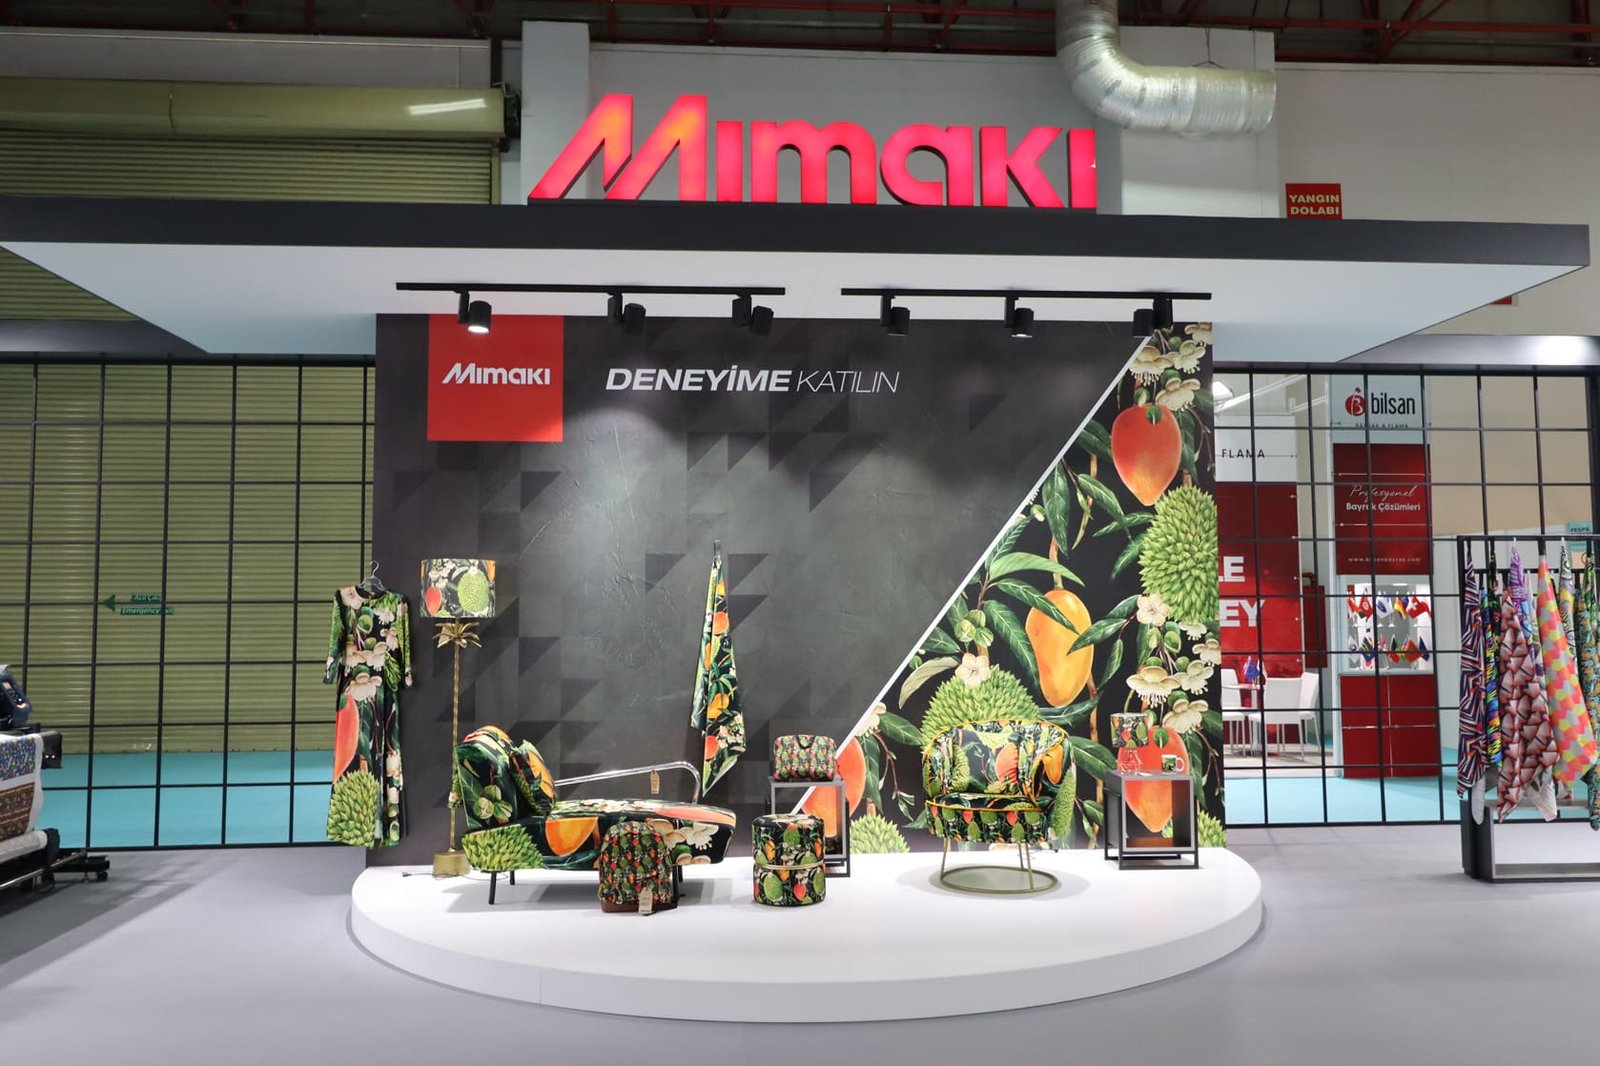 Mimaki continued its tradition of innovation at FESPA Eurasia 2021